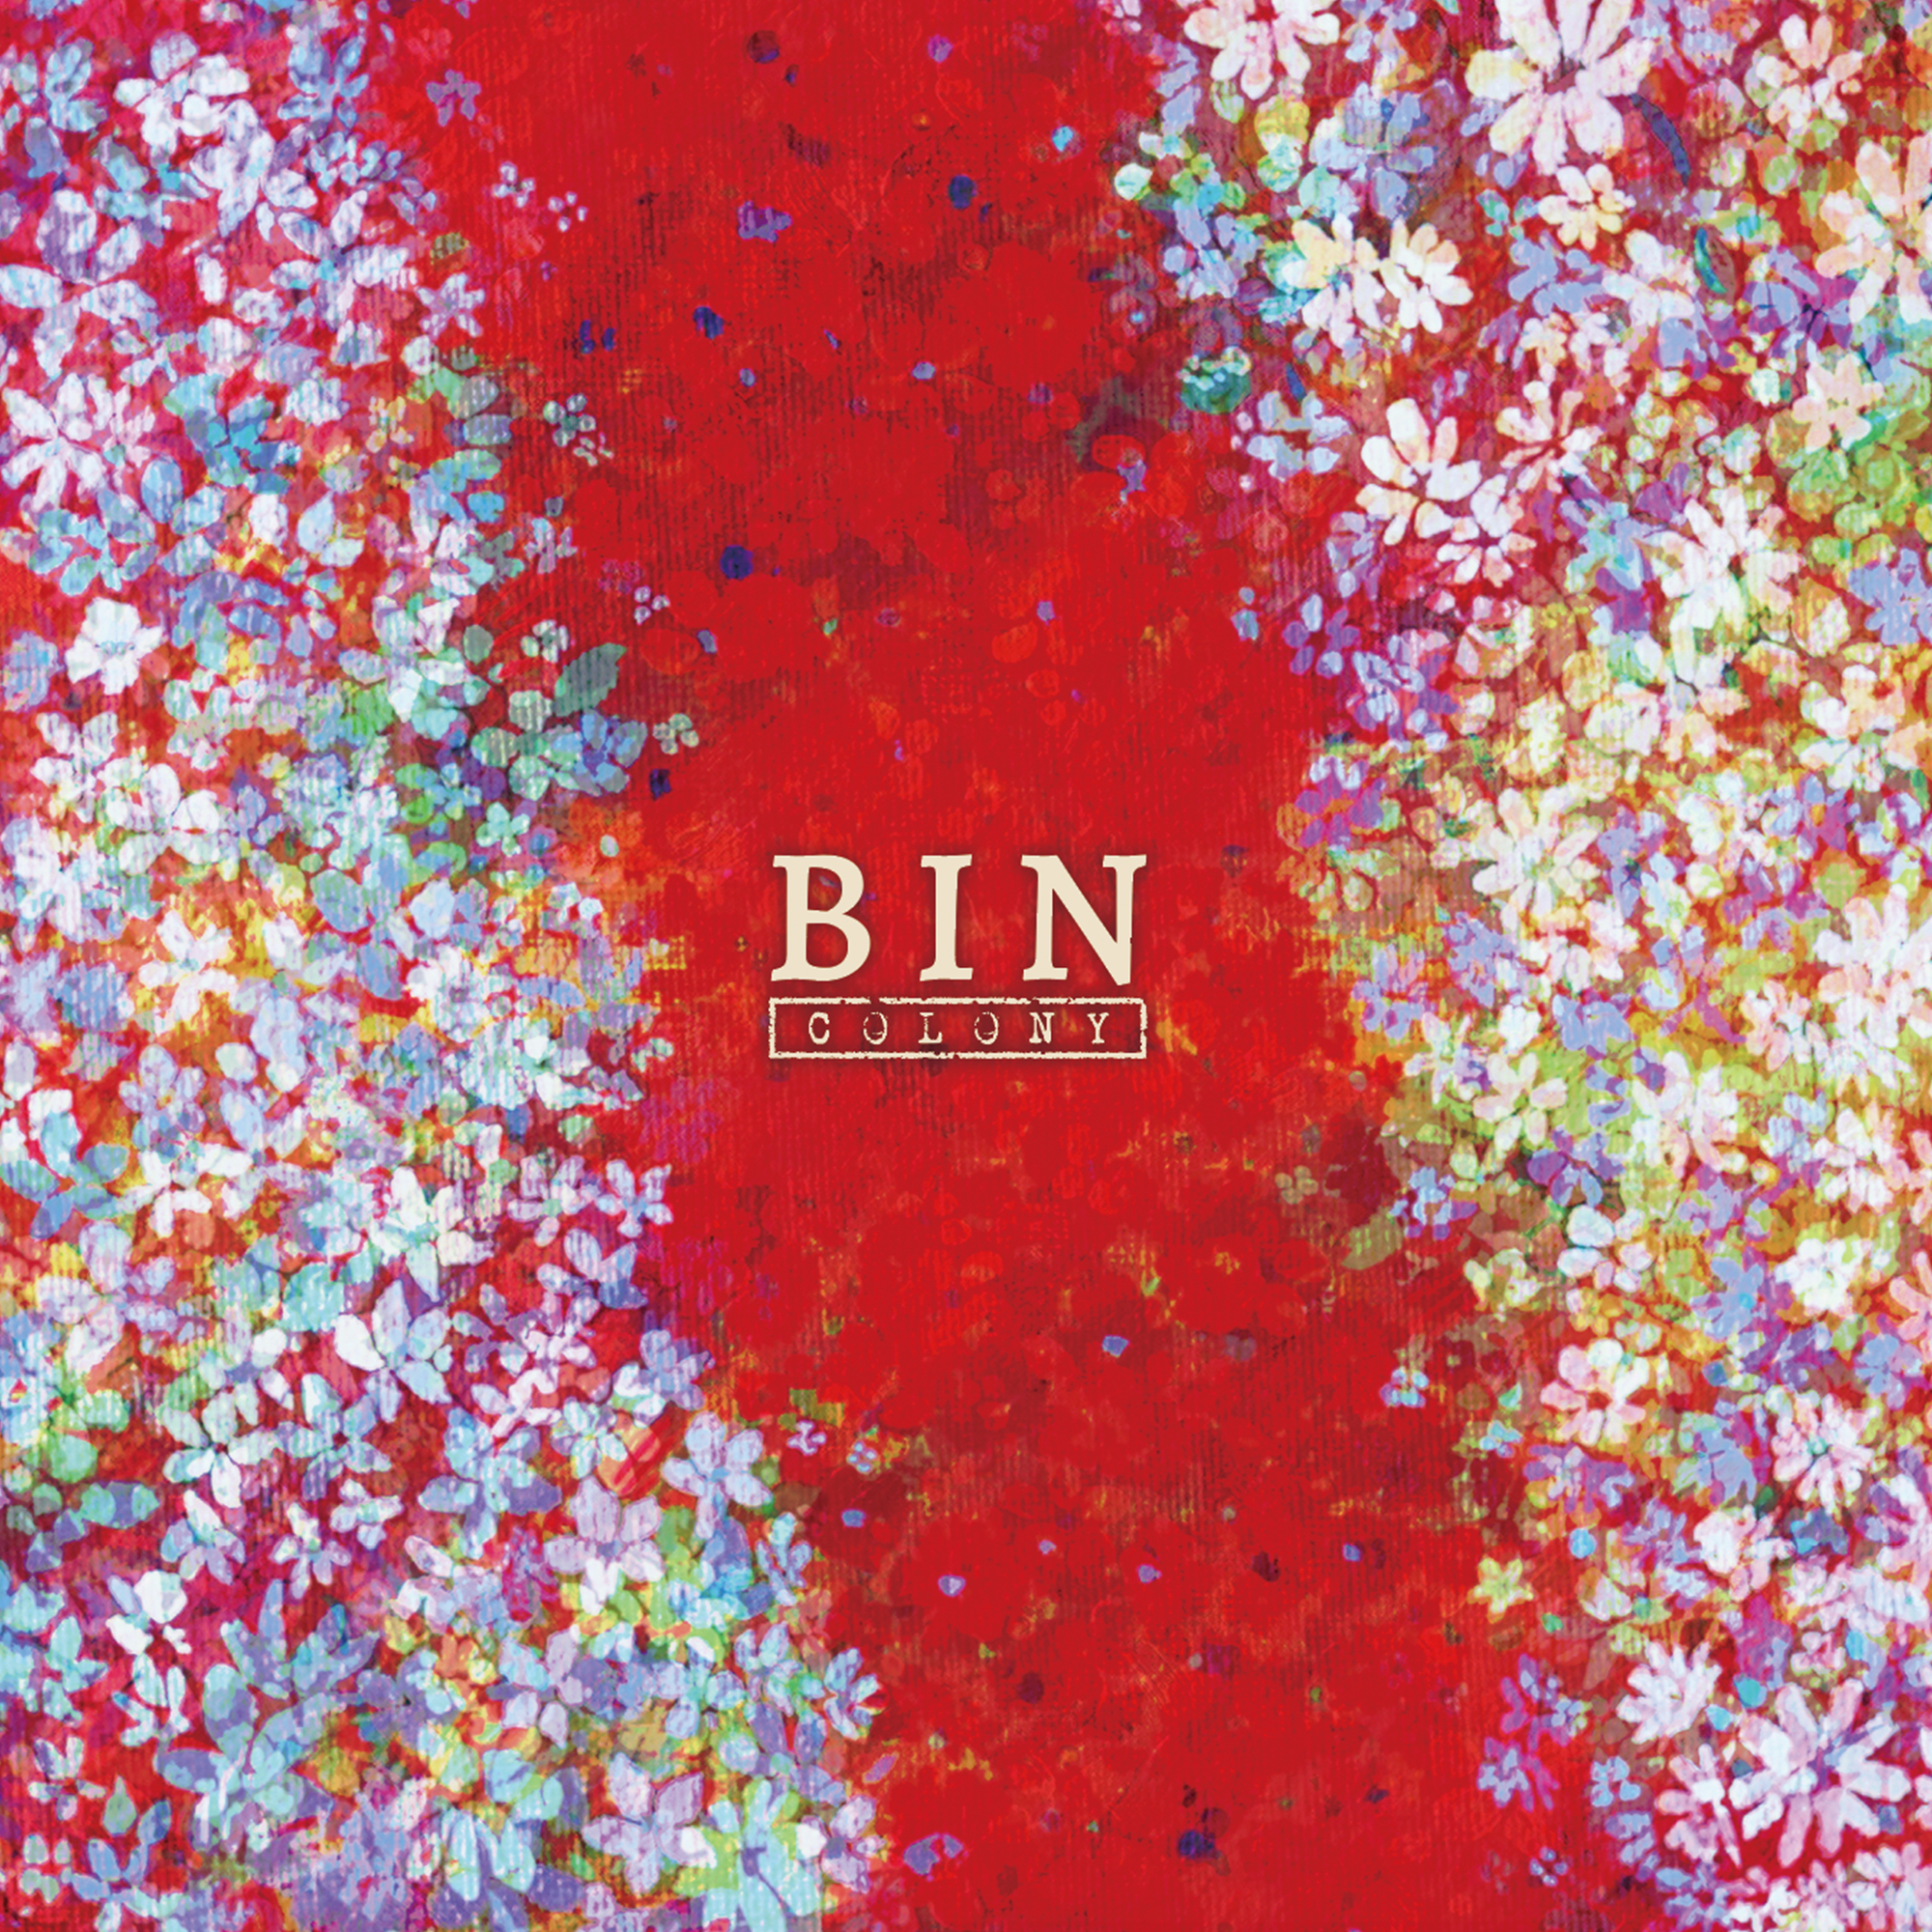 BIN 1st Album "COLONY" Normal Edition (CD Only) Release on March 24th 2021